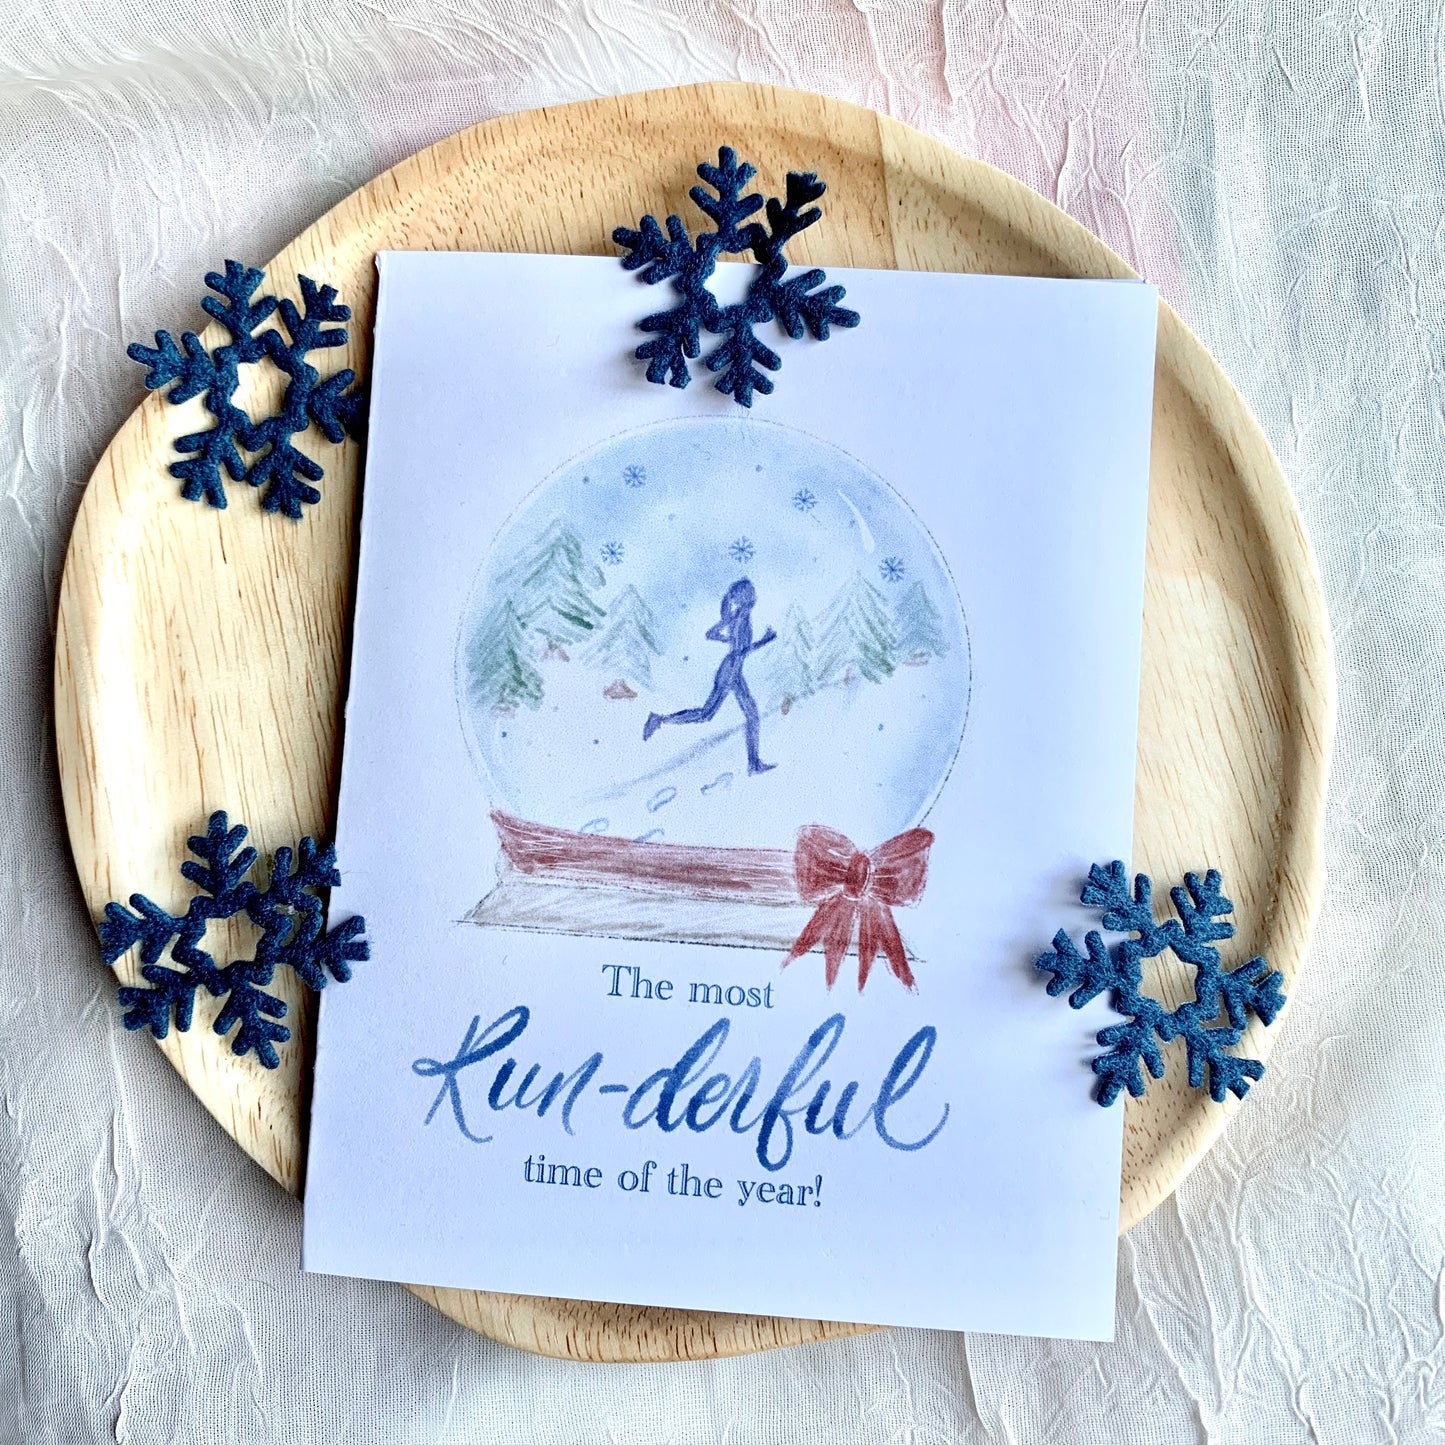 The most runderful time of year, Runner holiday card